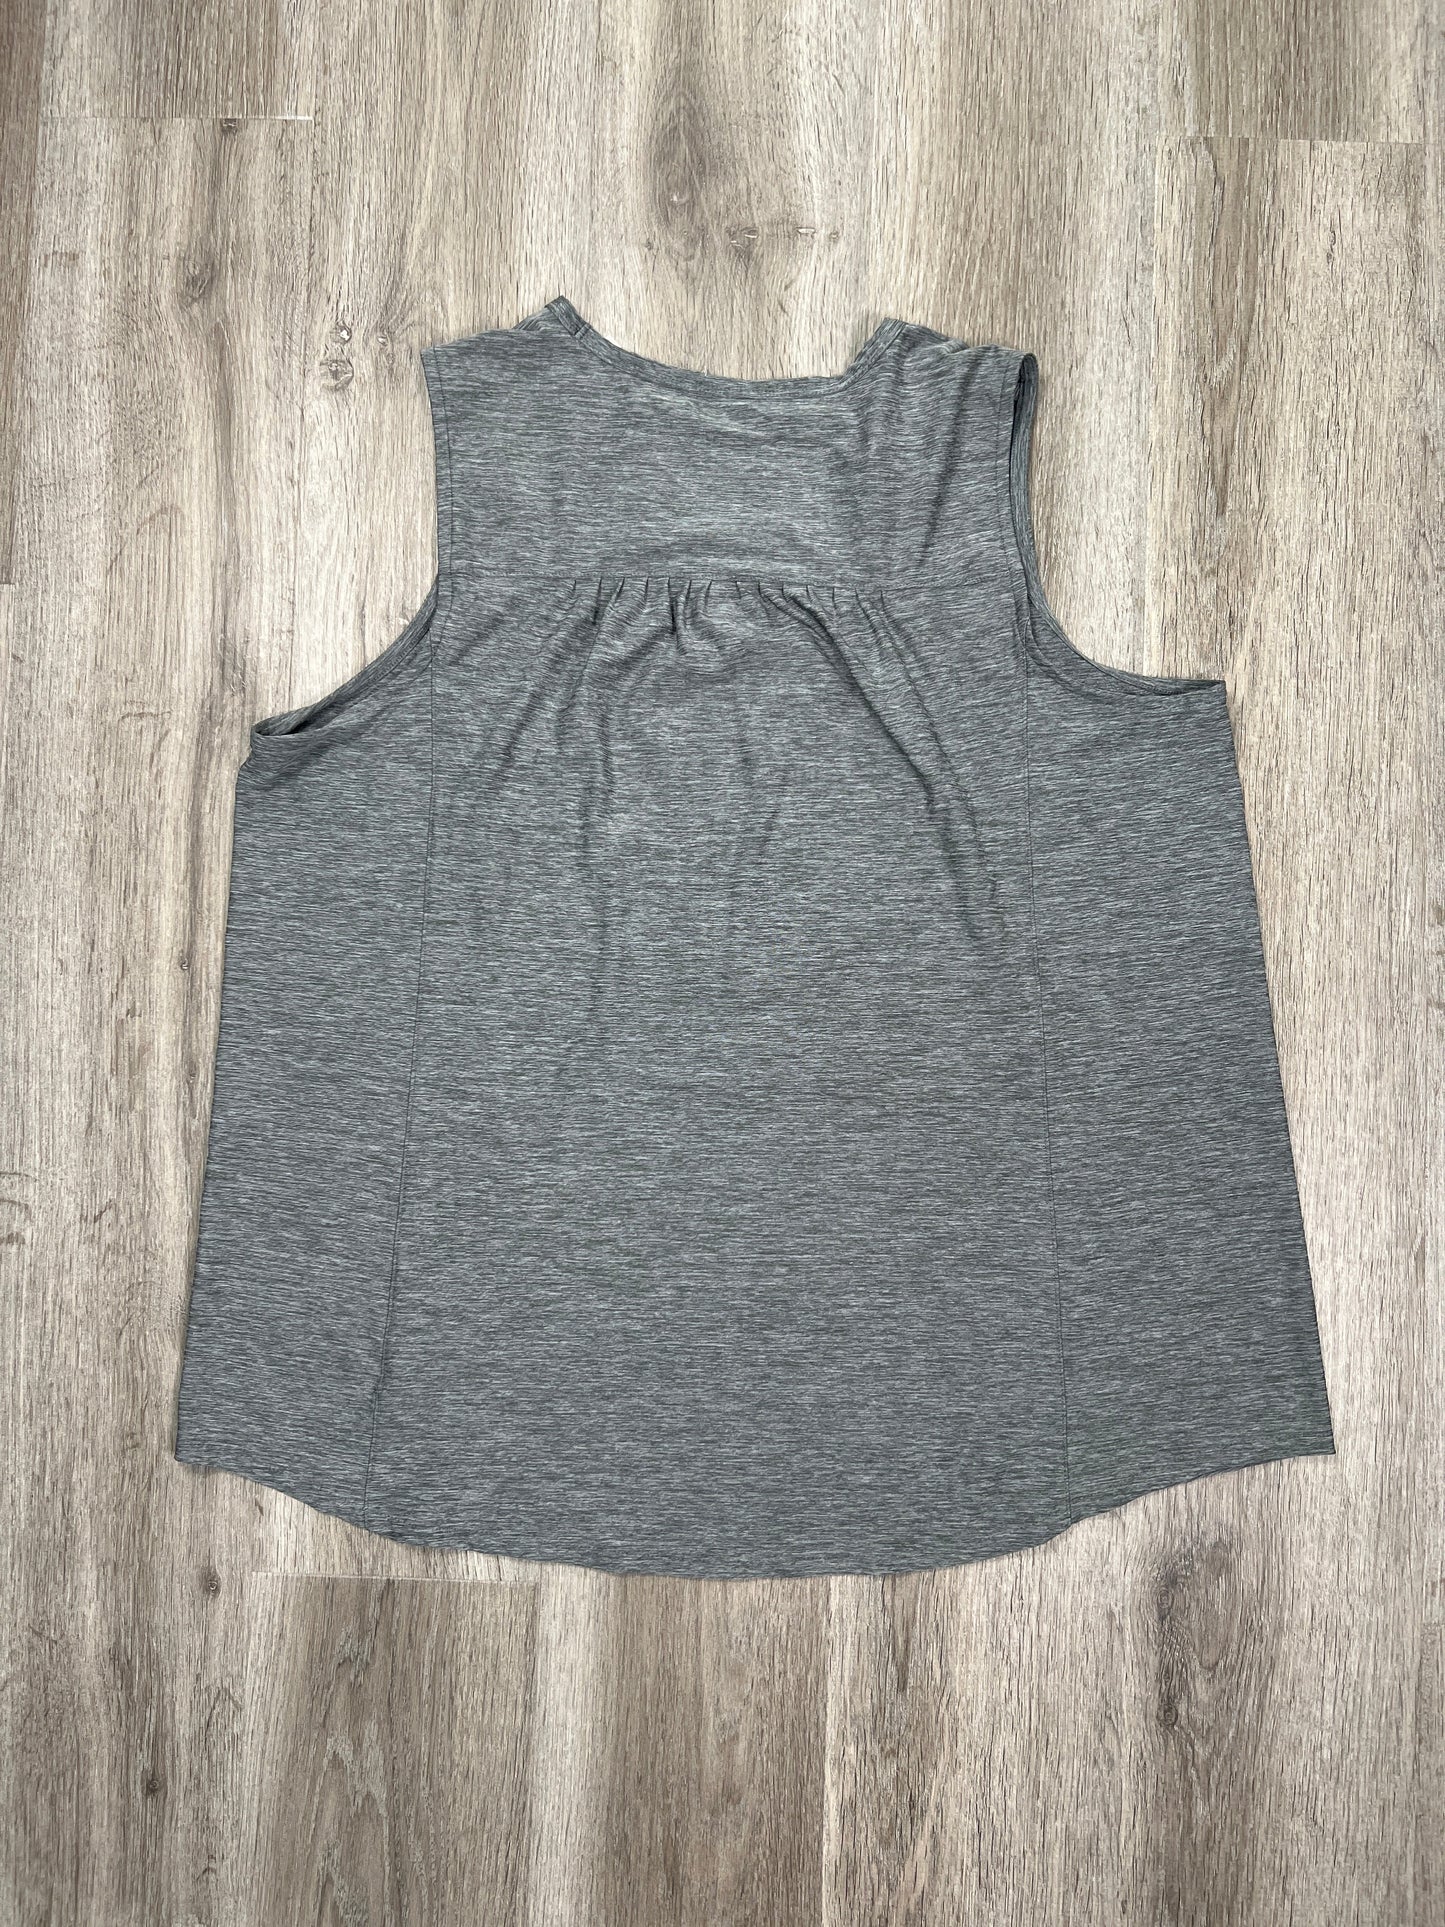 Tank Top By Duluth Trading  Size: 2x